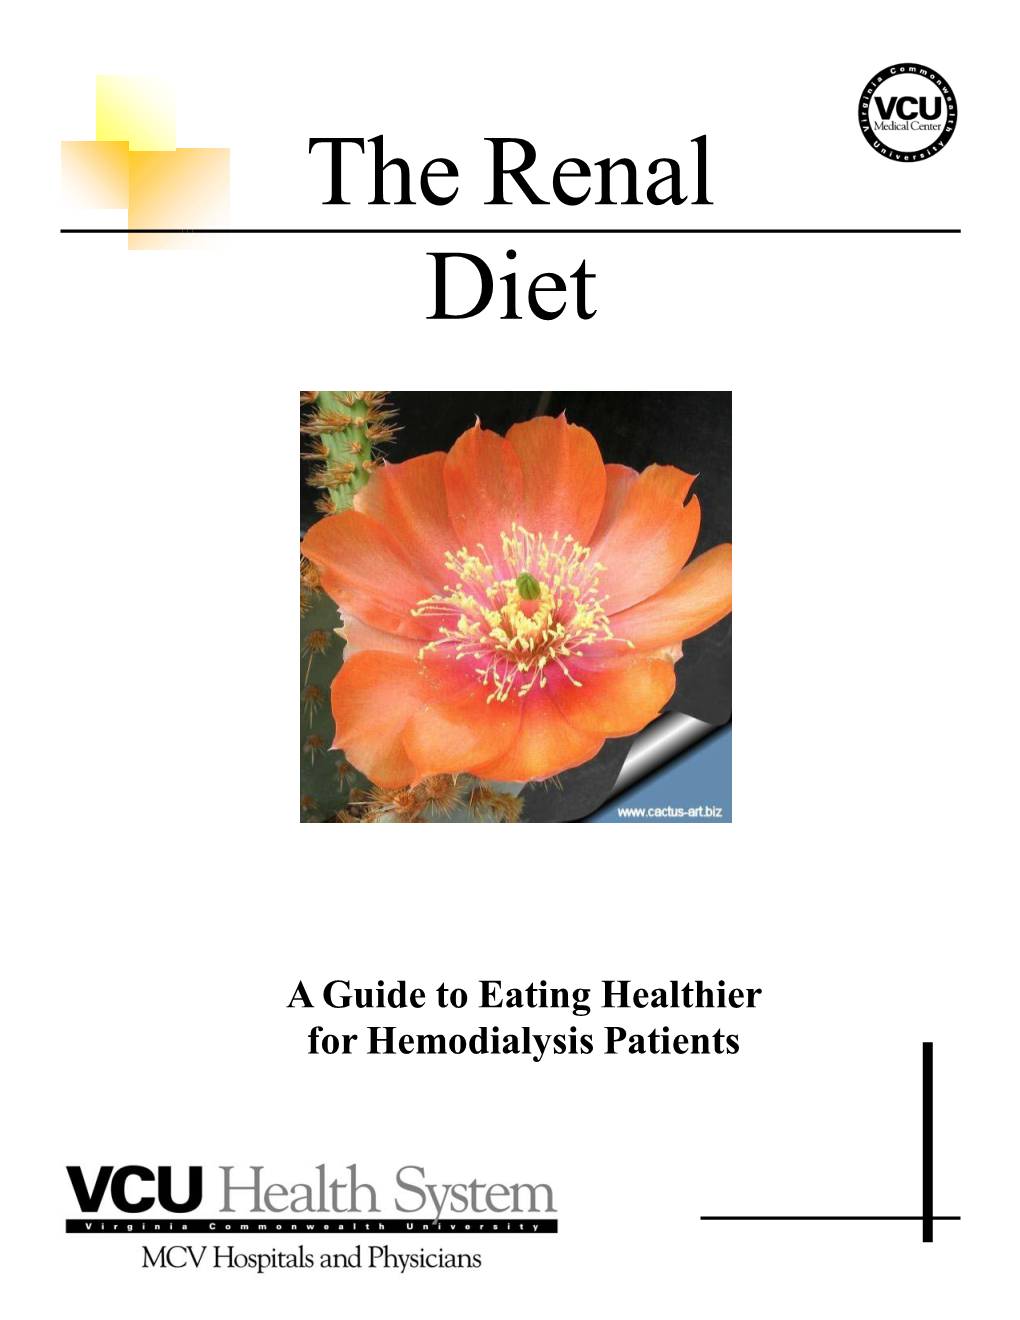 The Renal Diet